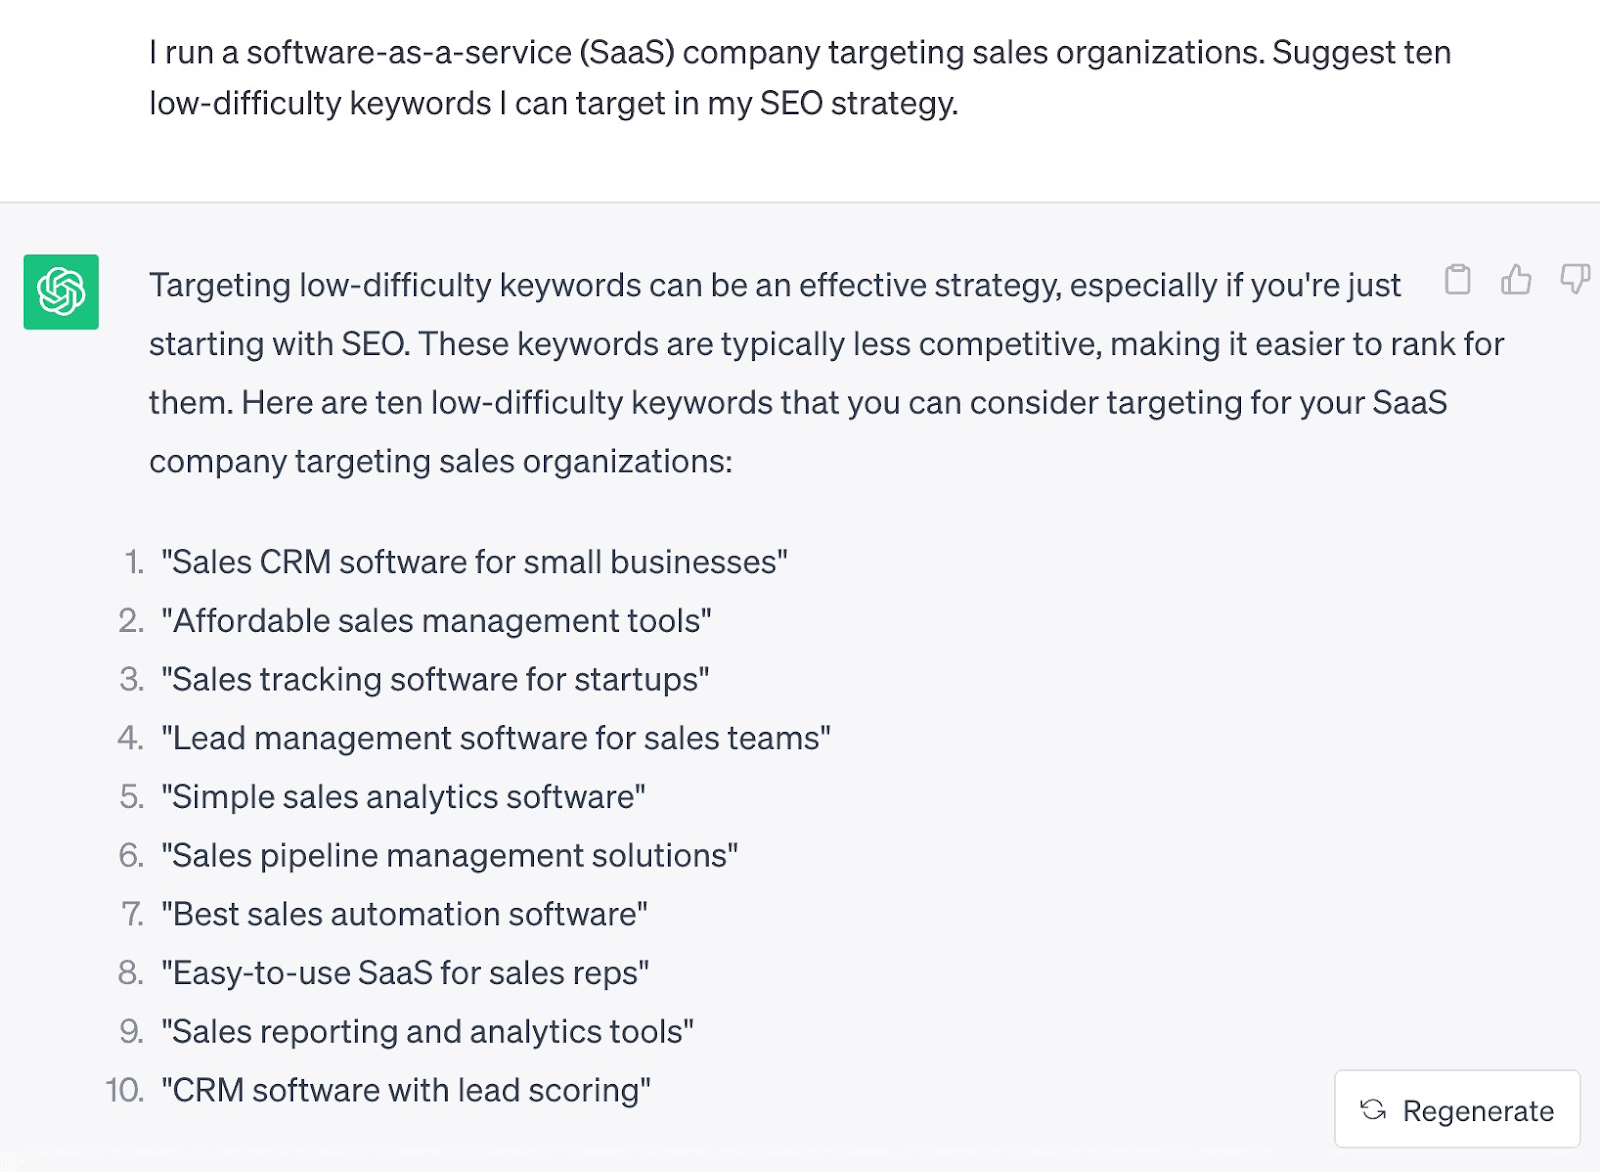 ChatGPT's response to "I run a software-as-a-service (SaaS) company targeting sales organizations. Suggest ten low-difficulty keywords I can target in my SEO strategy." prompt